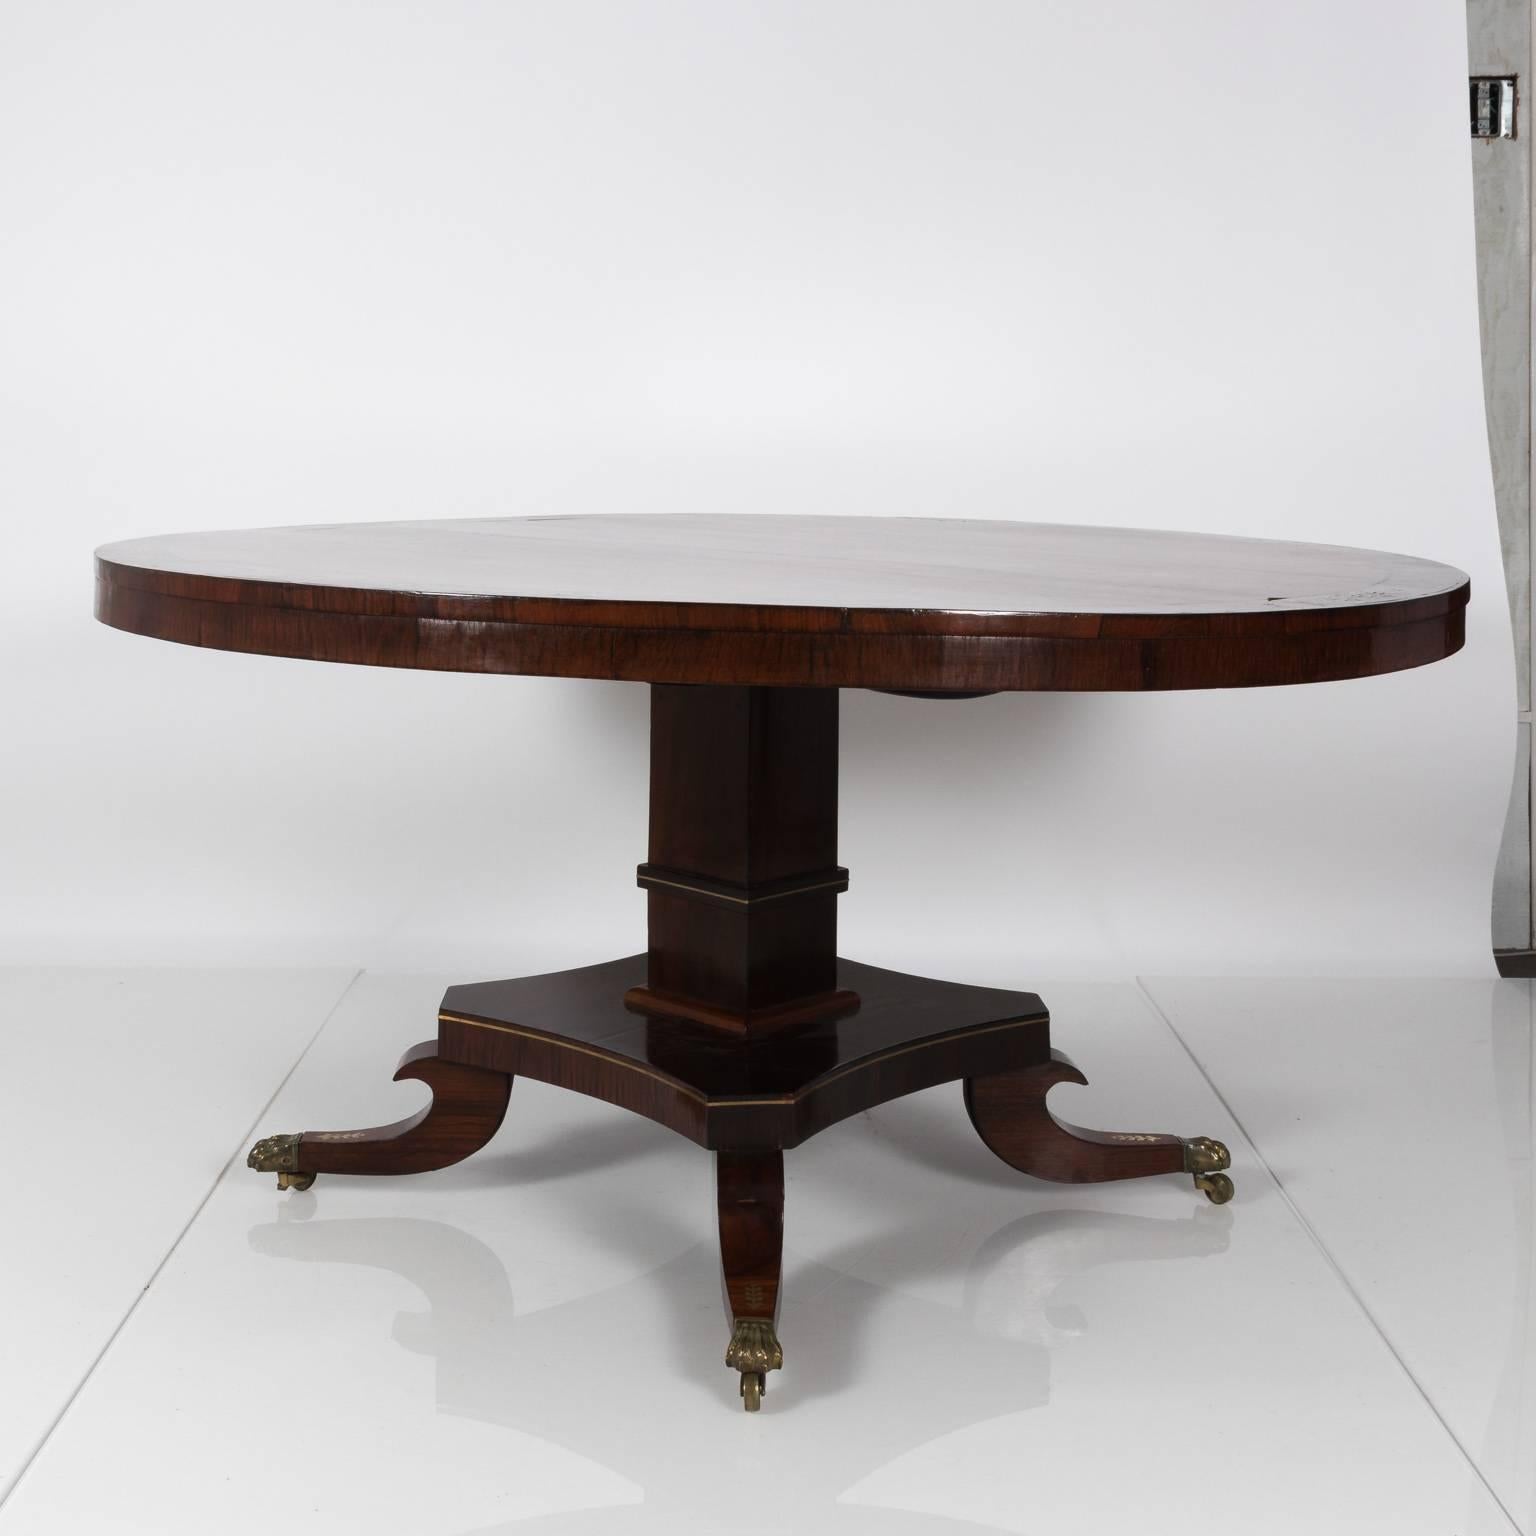 English Regency style rosewood centre table, circa 1820-1830.
 